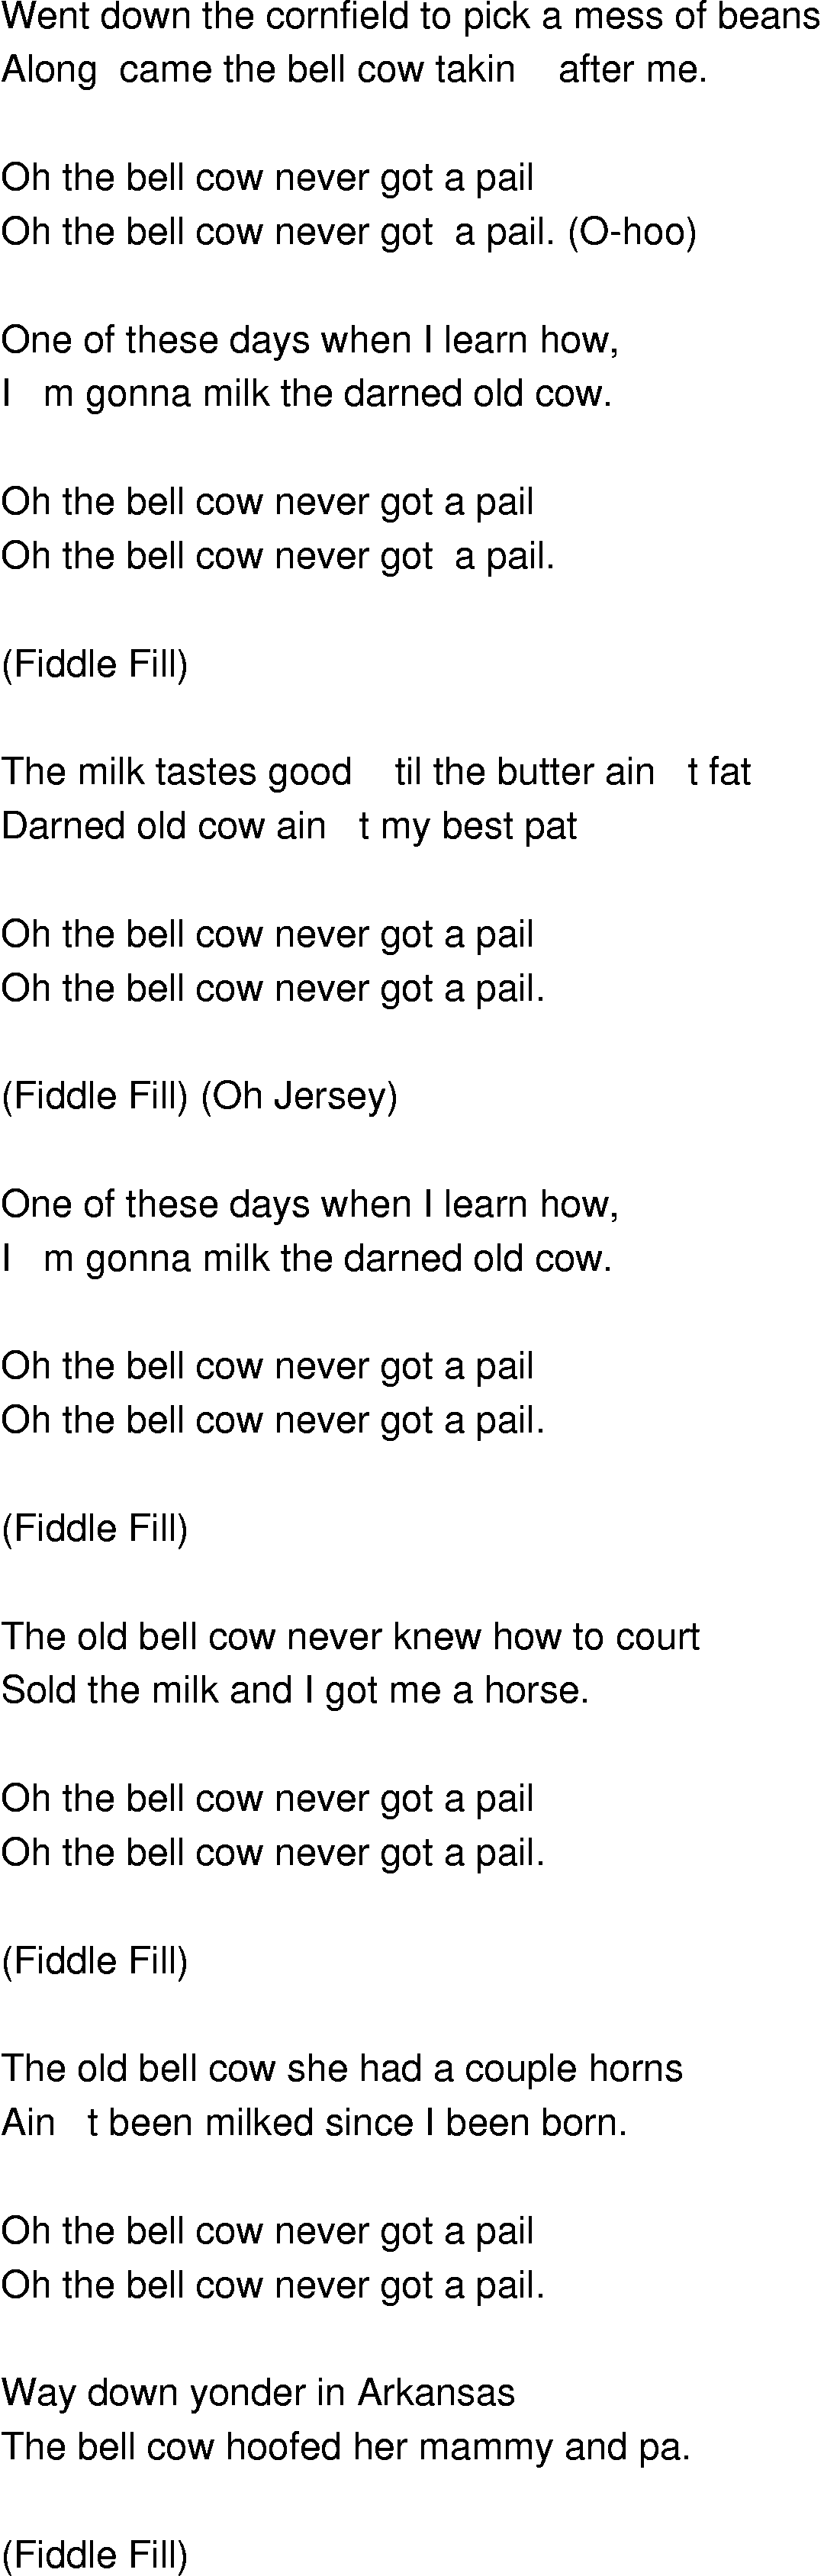 Old-Time (oldtimey) Song Lyrics - bell cow